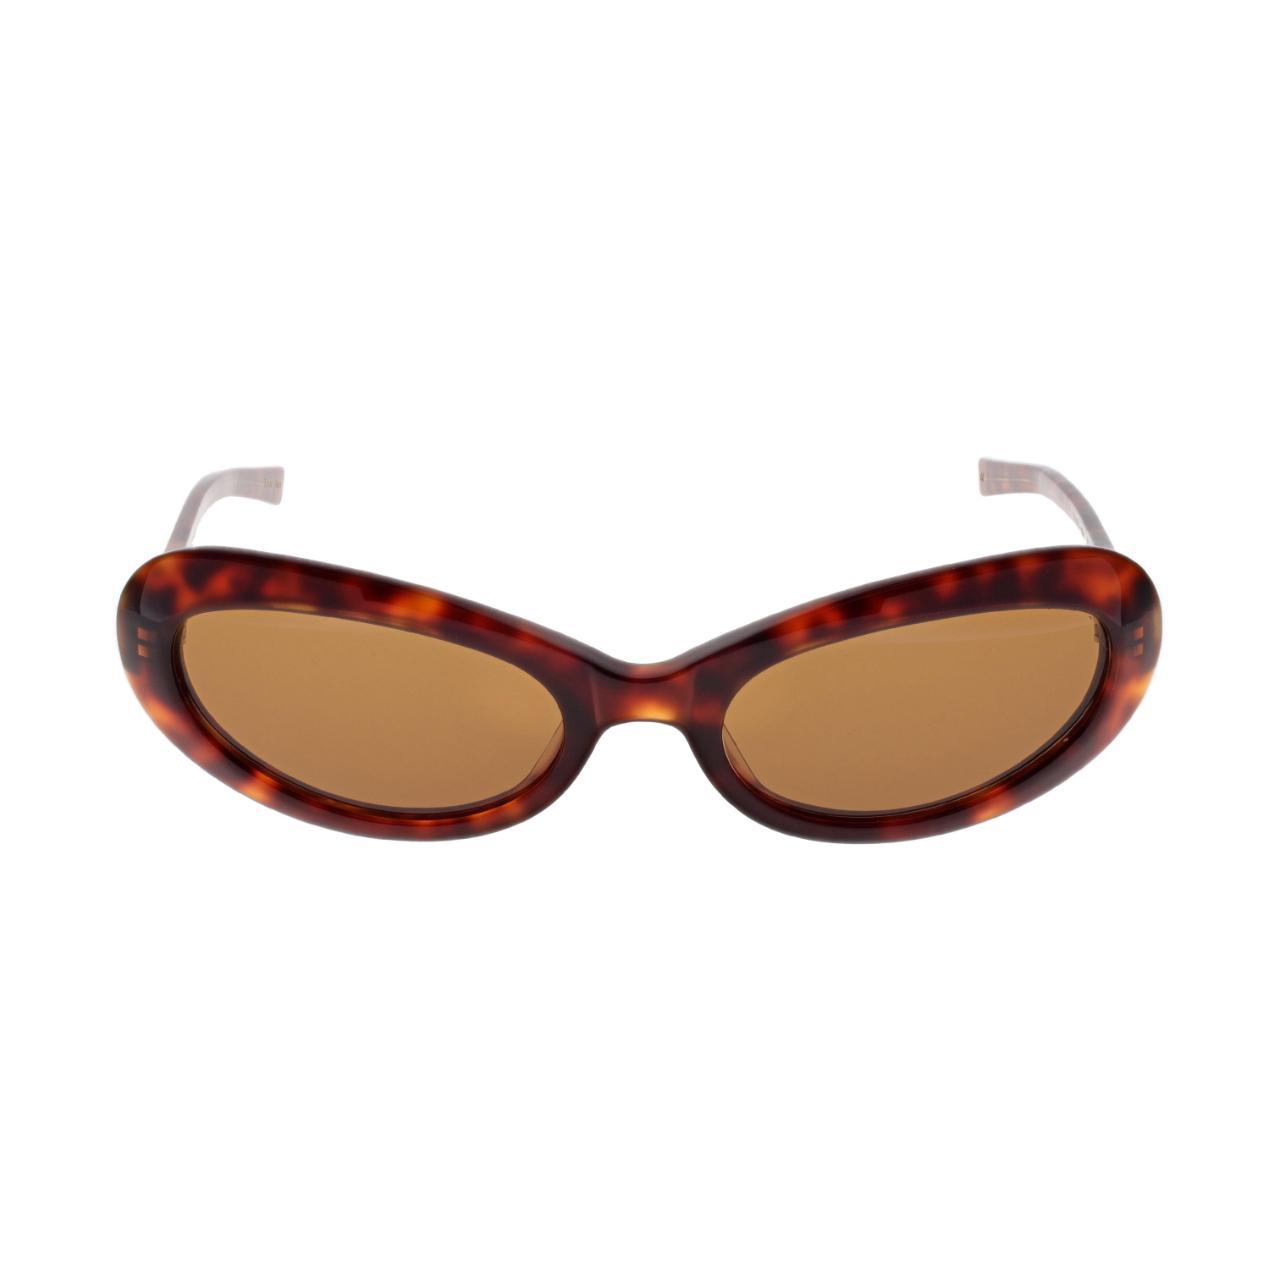 Product Image 2 - OLIVER PEOPLES RIVIERA SUNGLASSES

Oliver Peoples